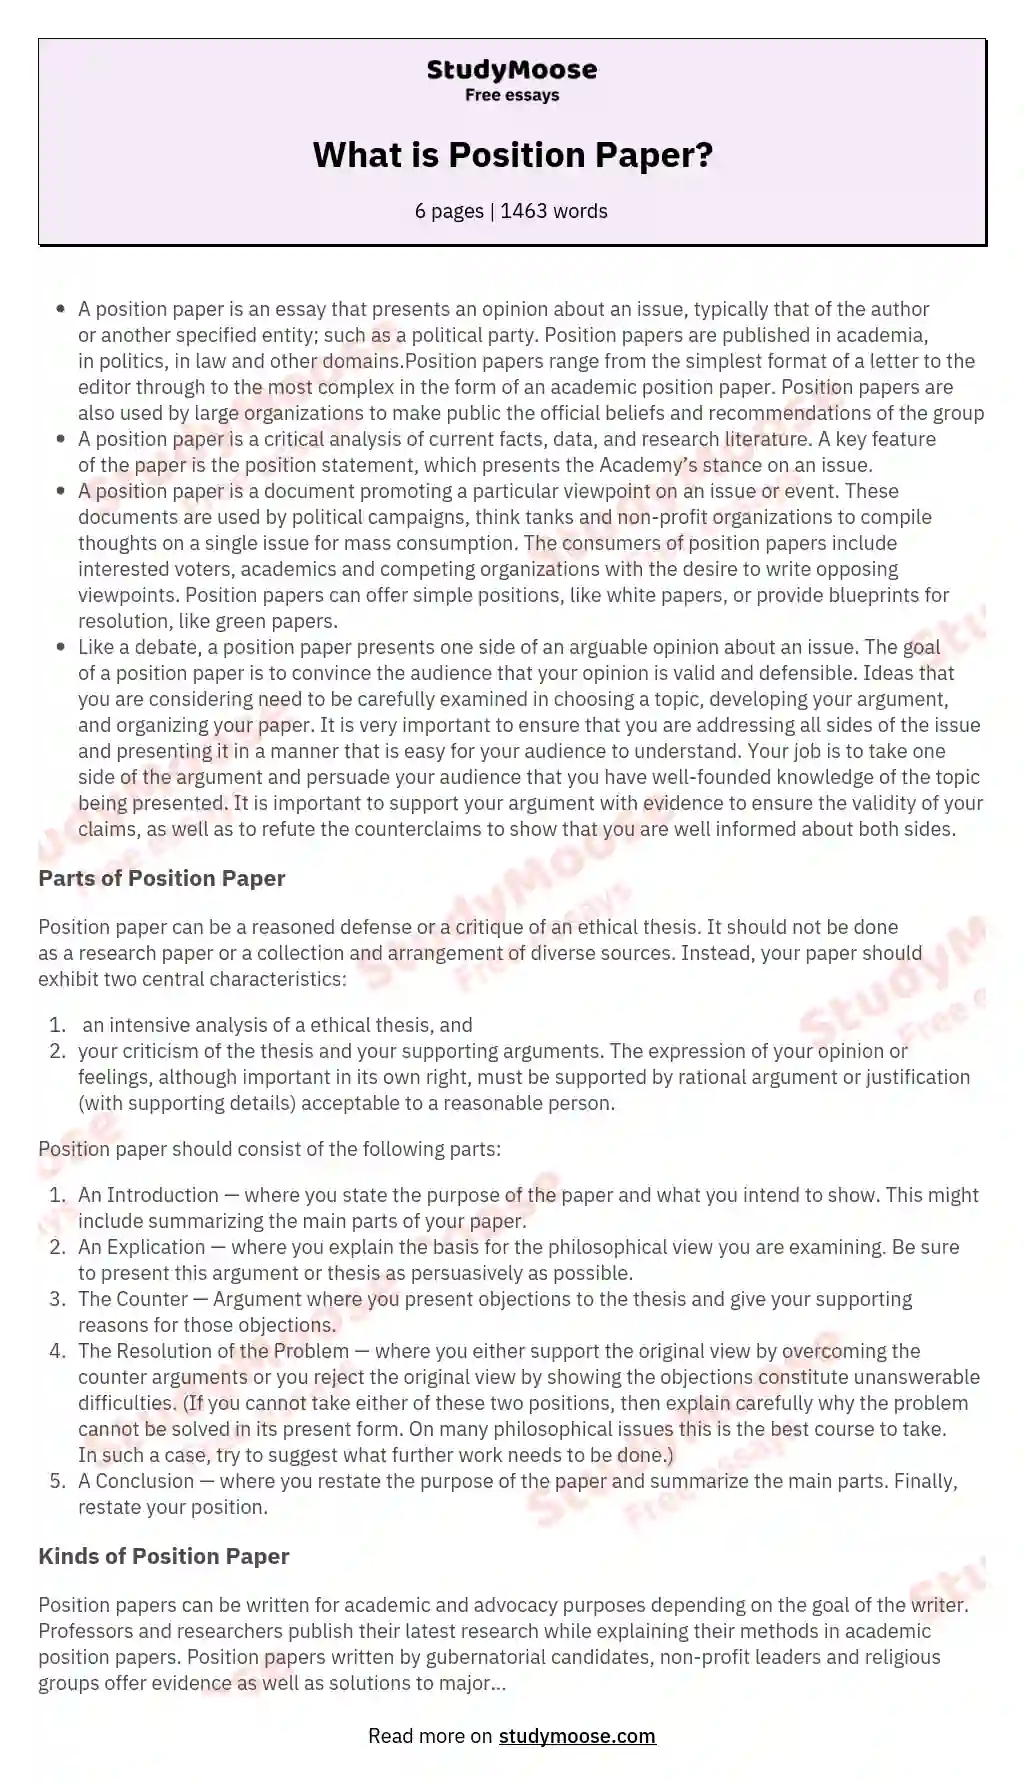 What is Position Paper?